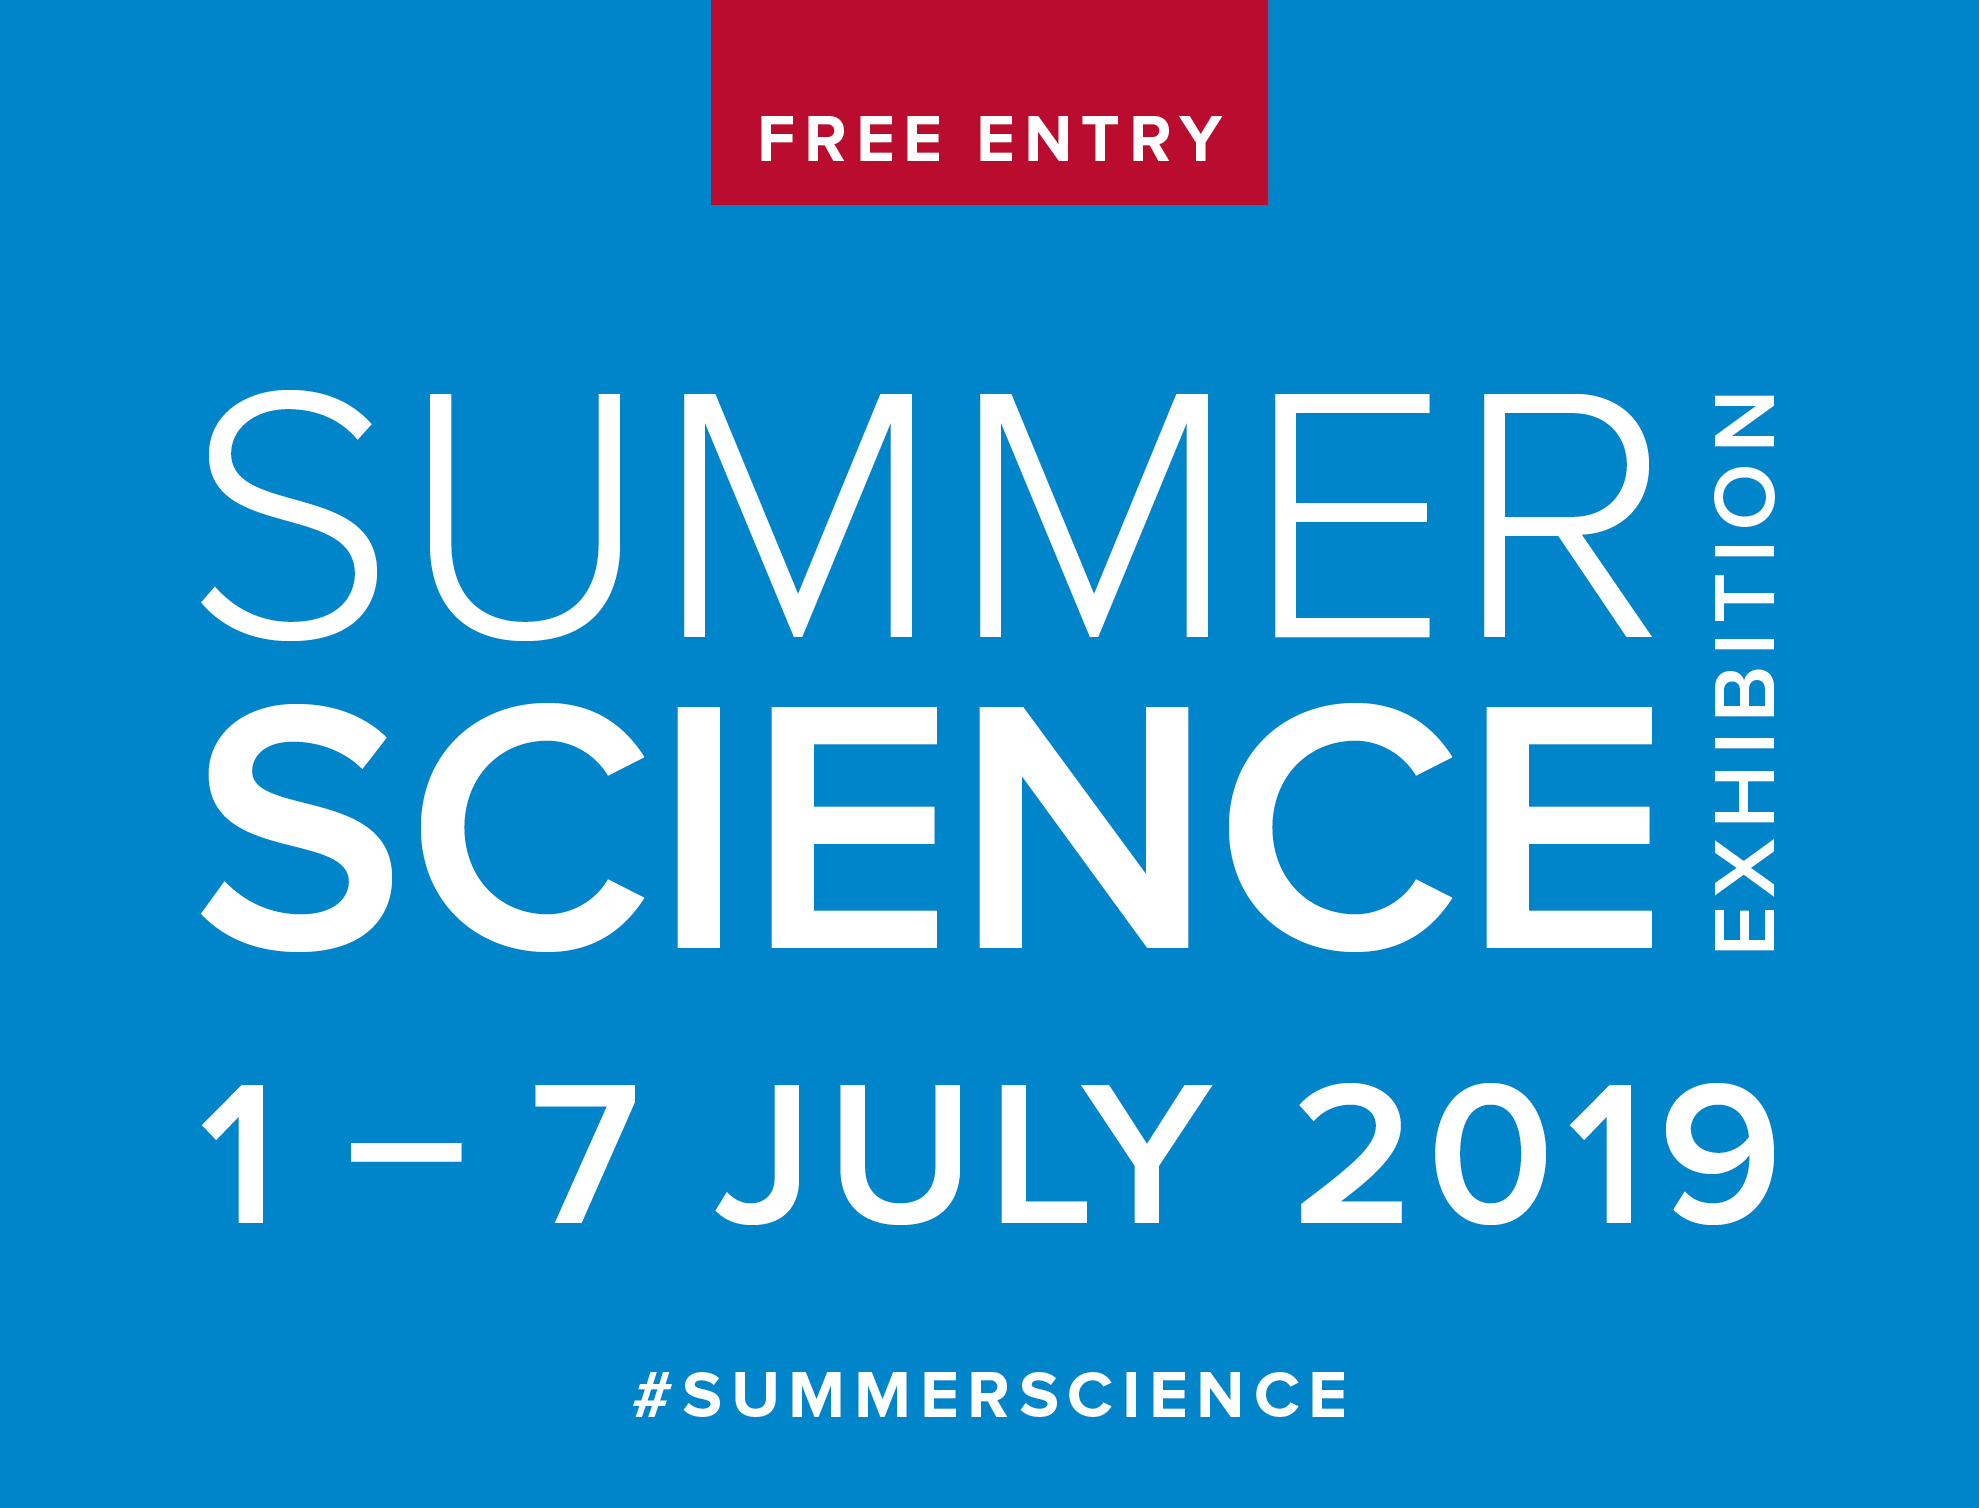 Summer Science Exhibition. 1-7 July 2019